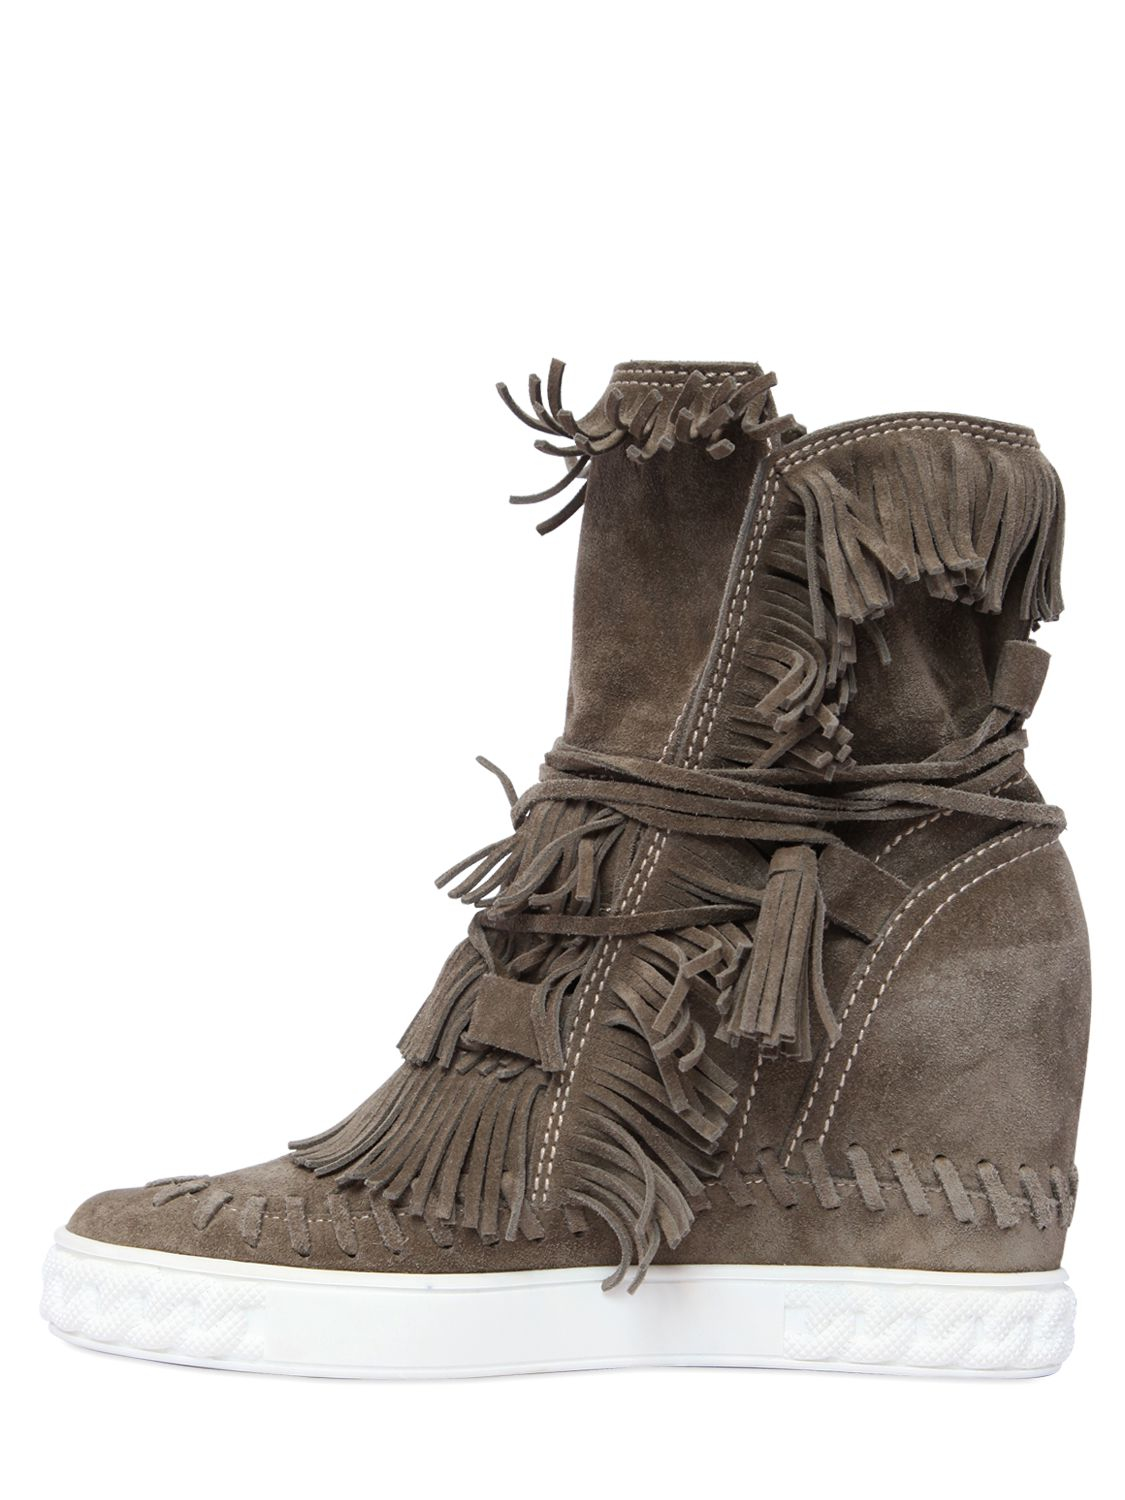 Lyst - Casadei 80mm Fringe Suede Wedge Boots in Natural